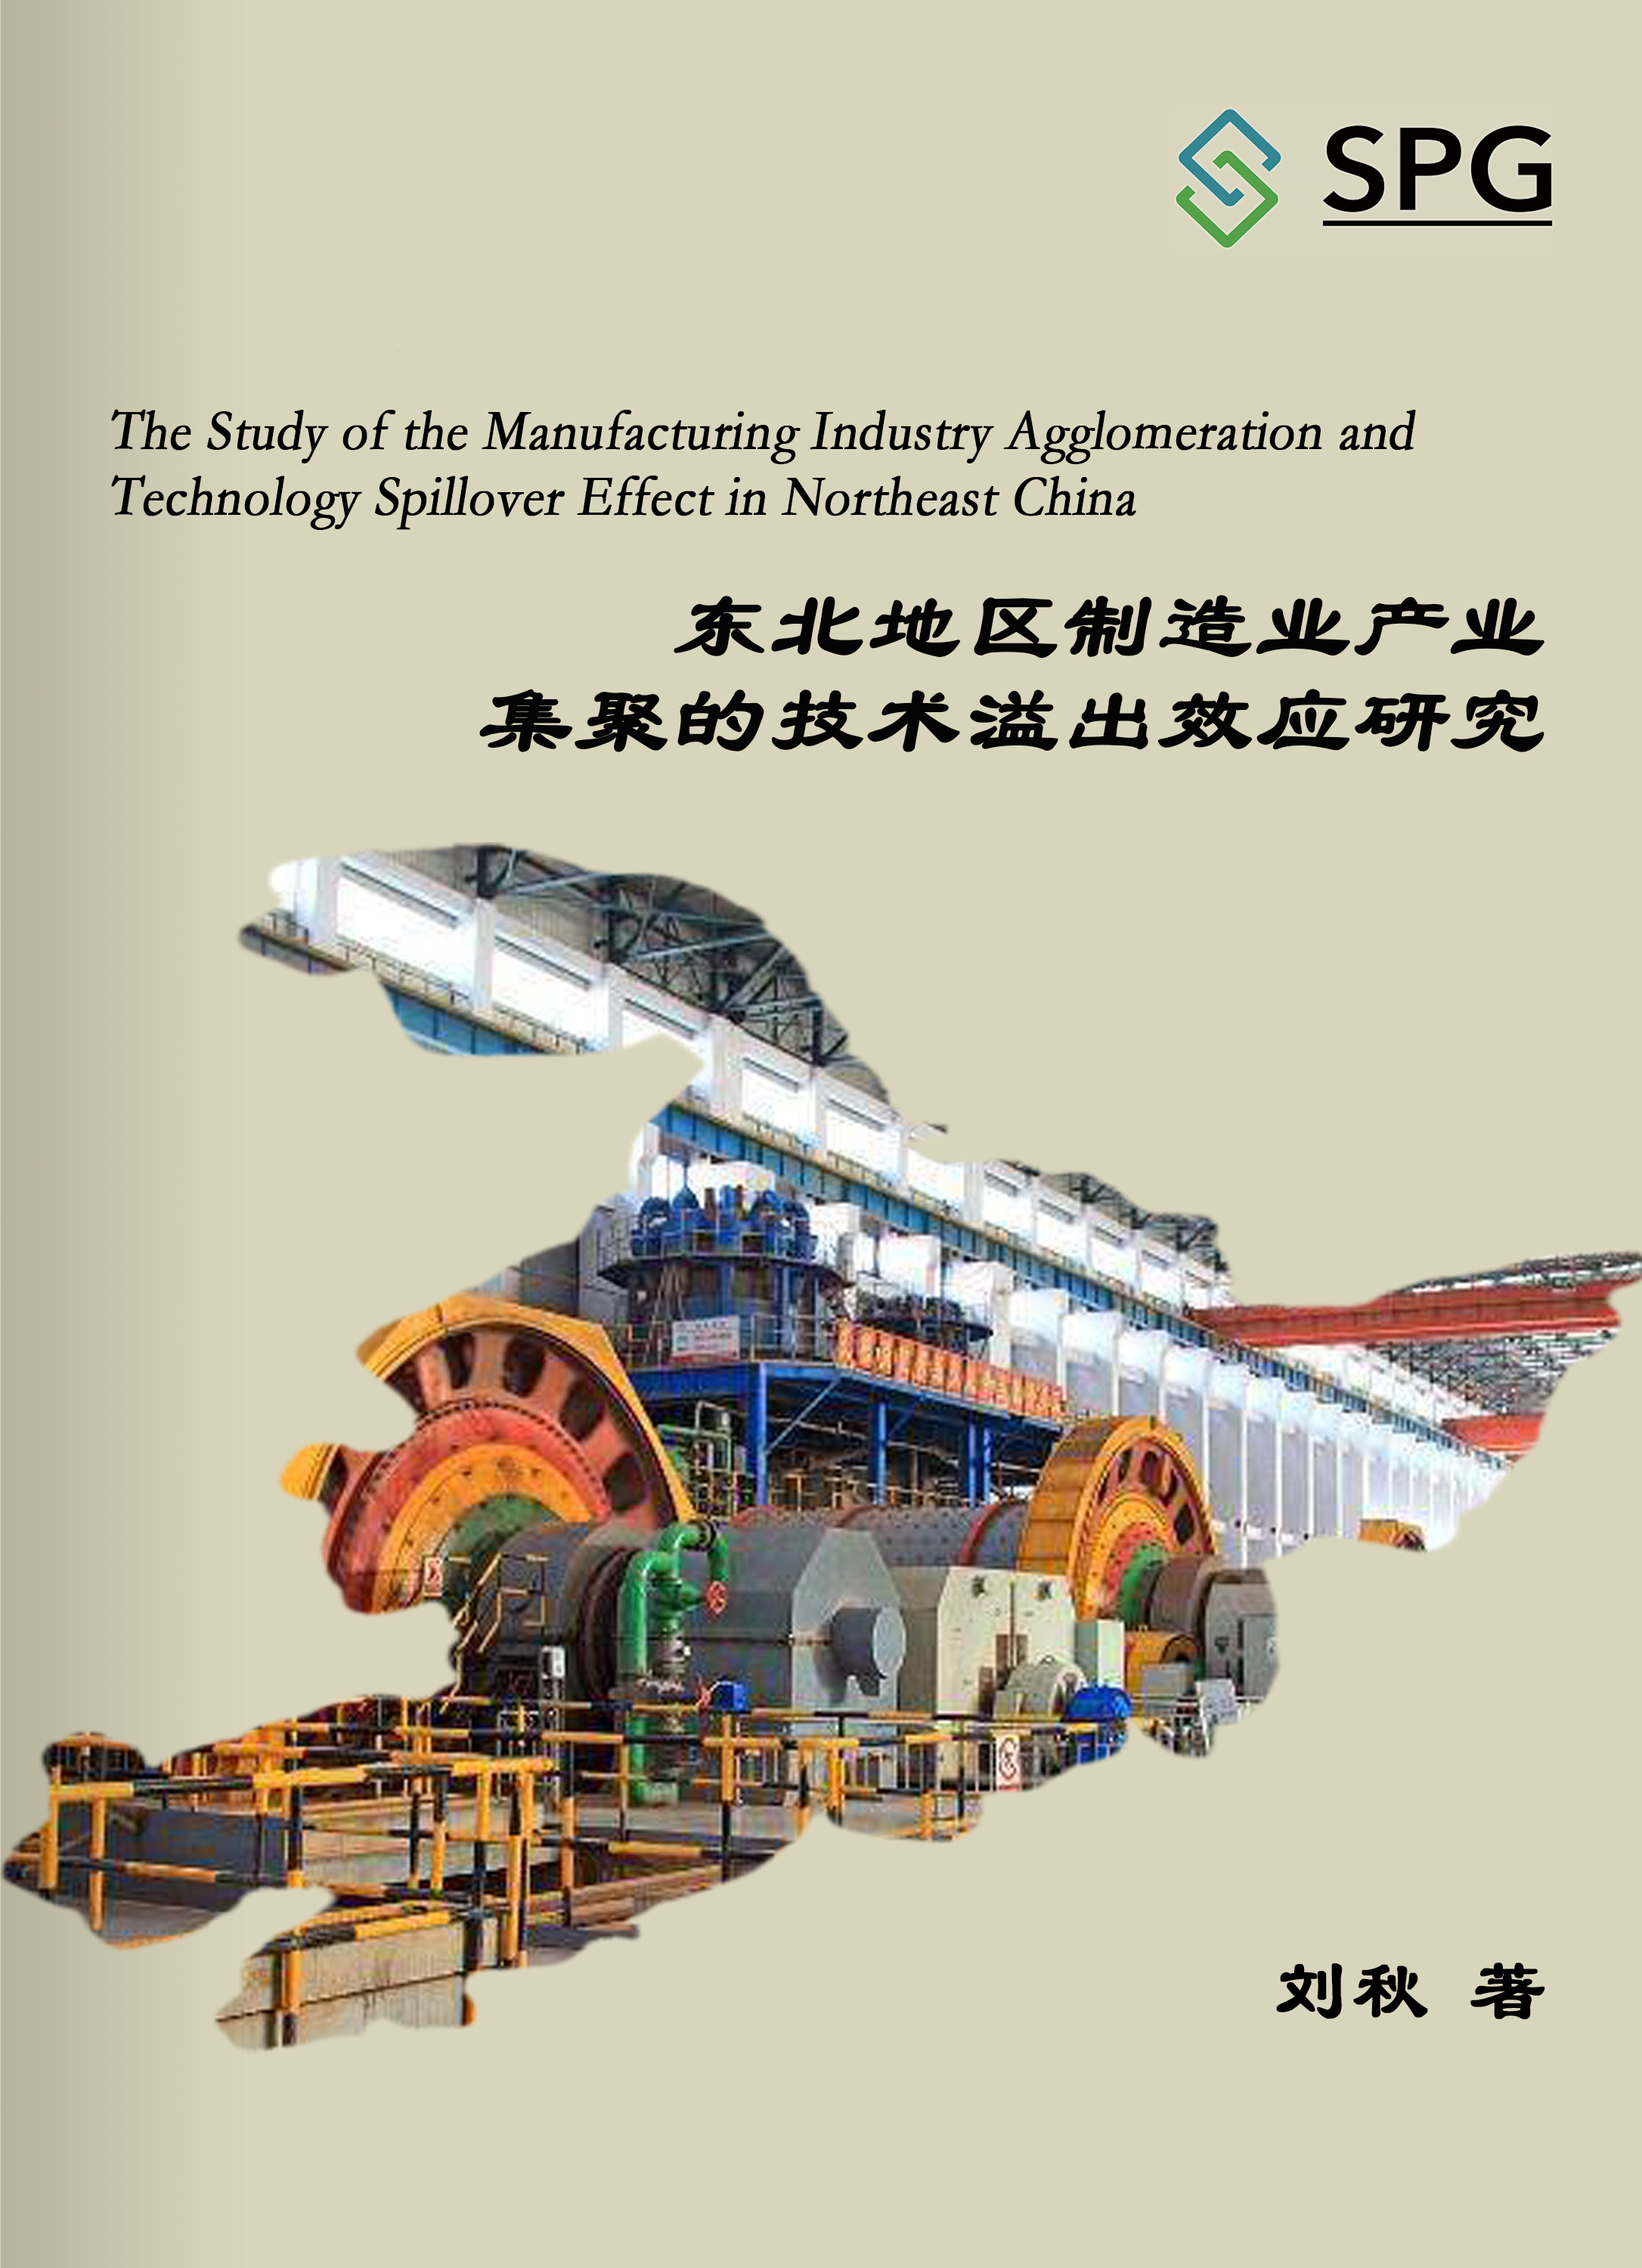 The Study of the Manufacturing Industry Agglomeration and Technology Spillover Effect in Northeast China | Scholar Publishing Group